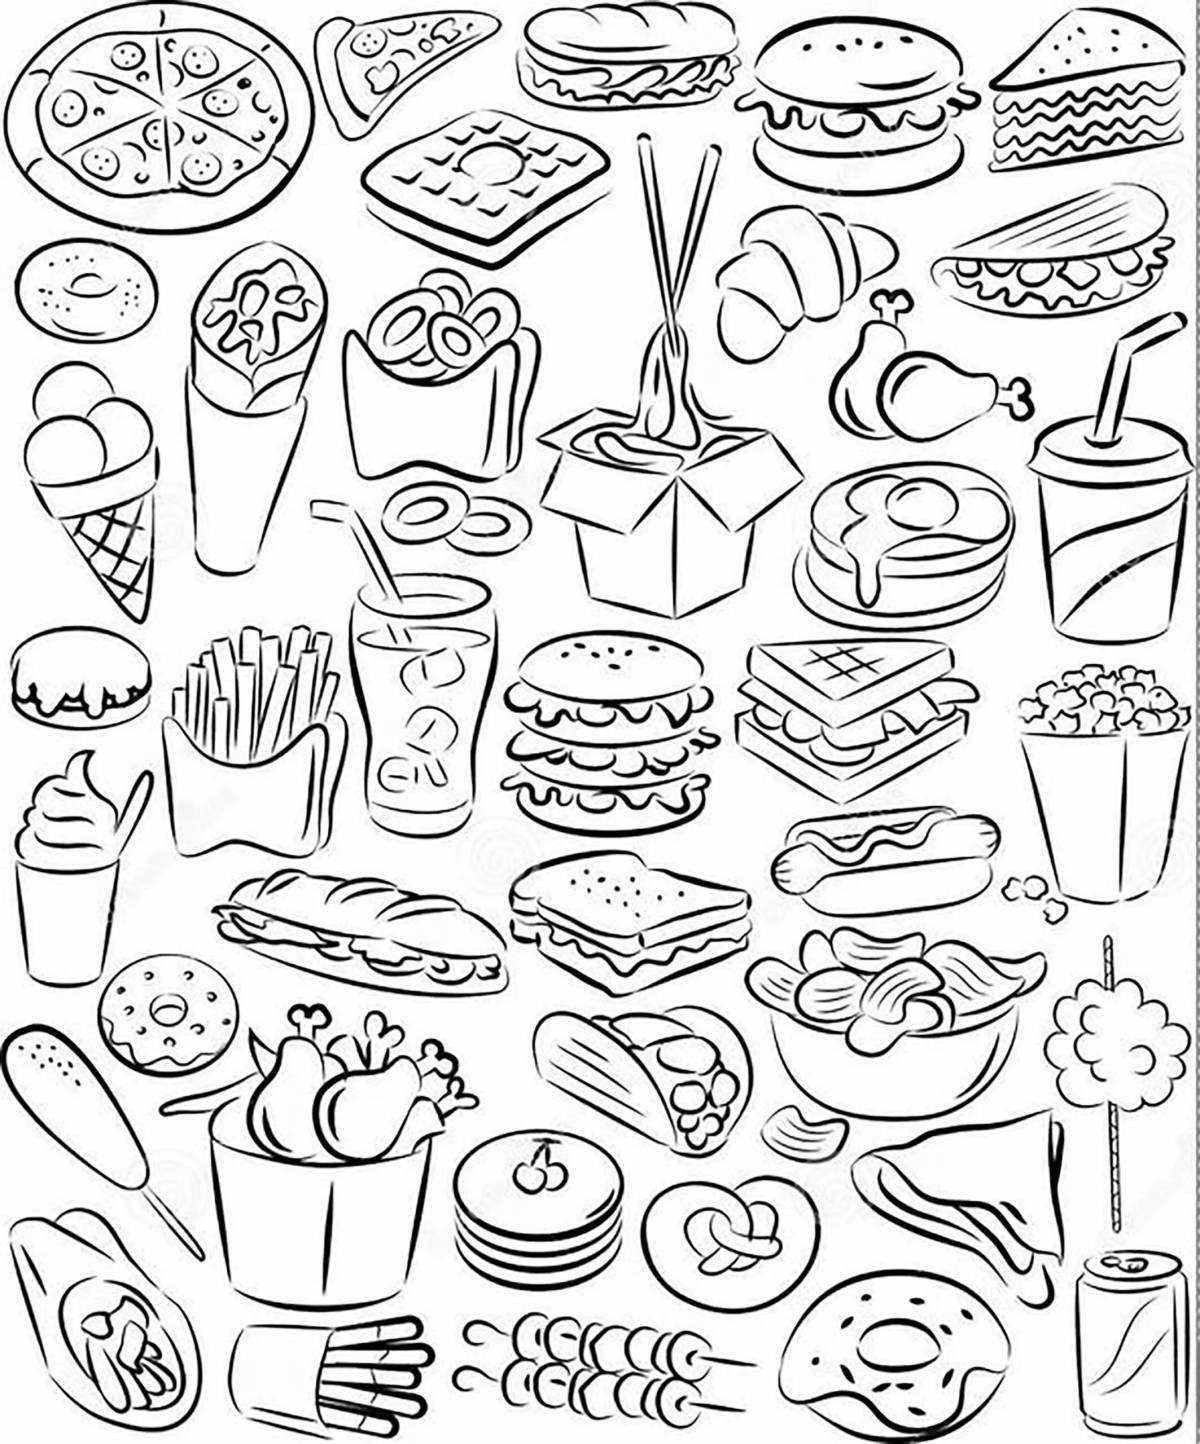 Refreshing ooty food coloring page